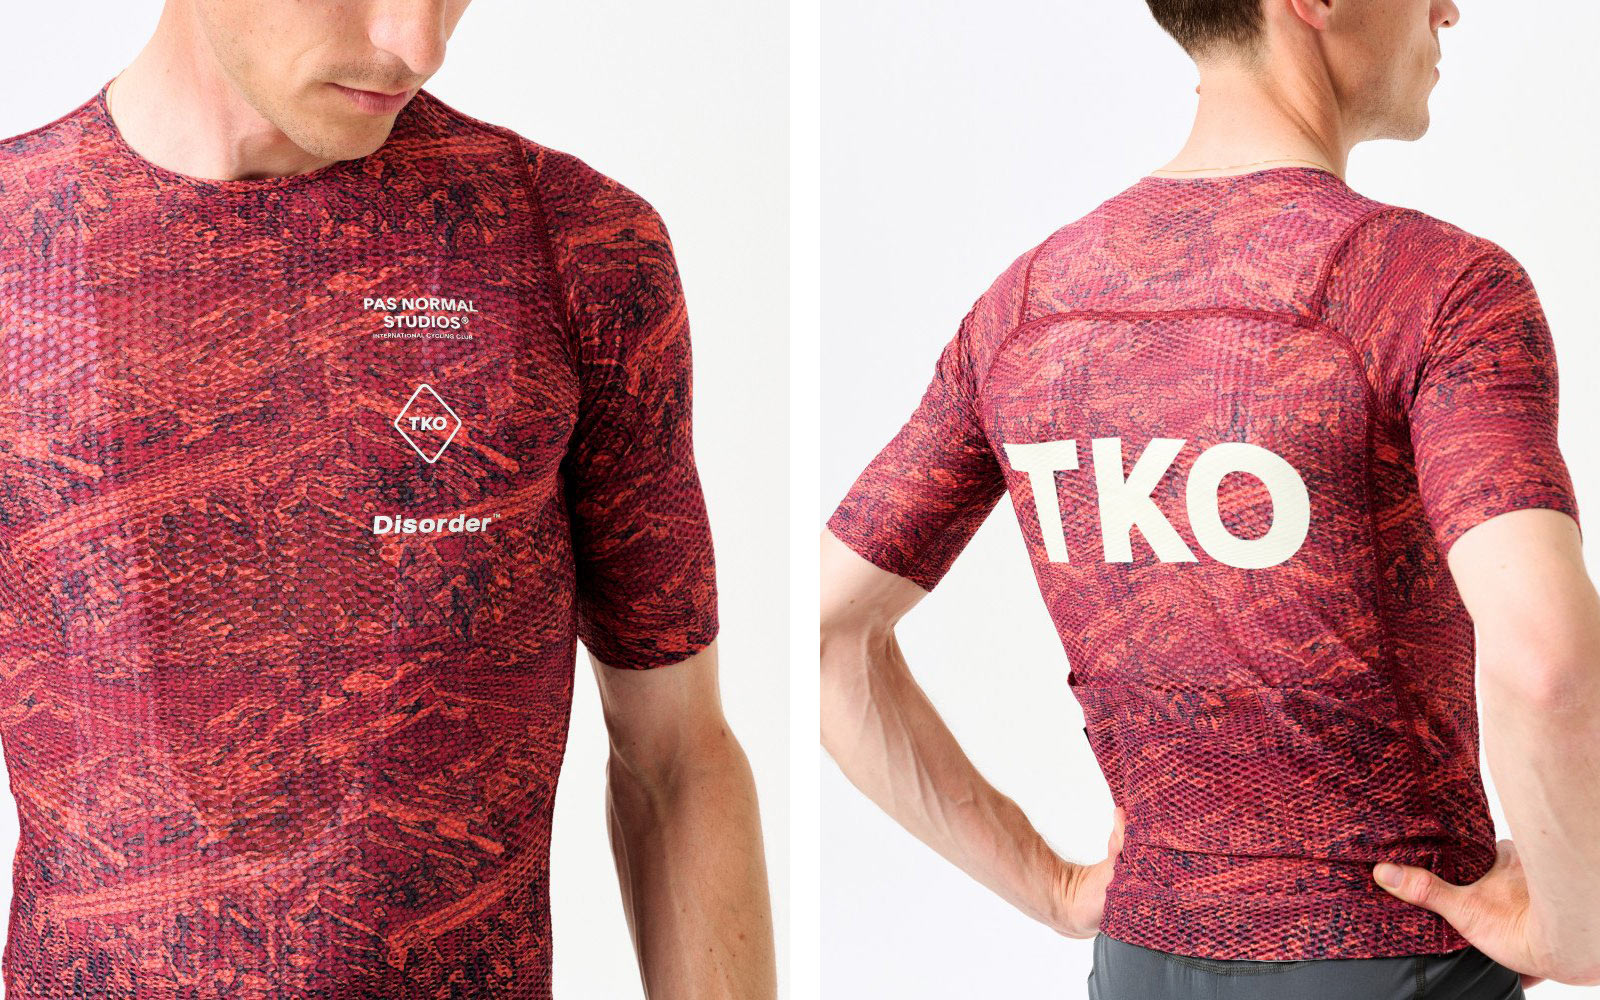 Pas Normal Studios TKO Disorder limited edition versions of Mechanism Pro road cycling kit, mesh Zipless Jersey